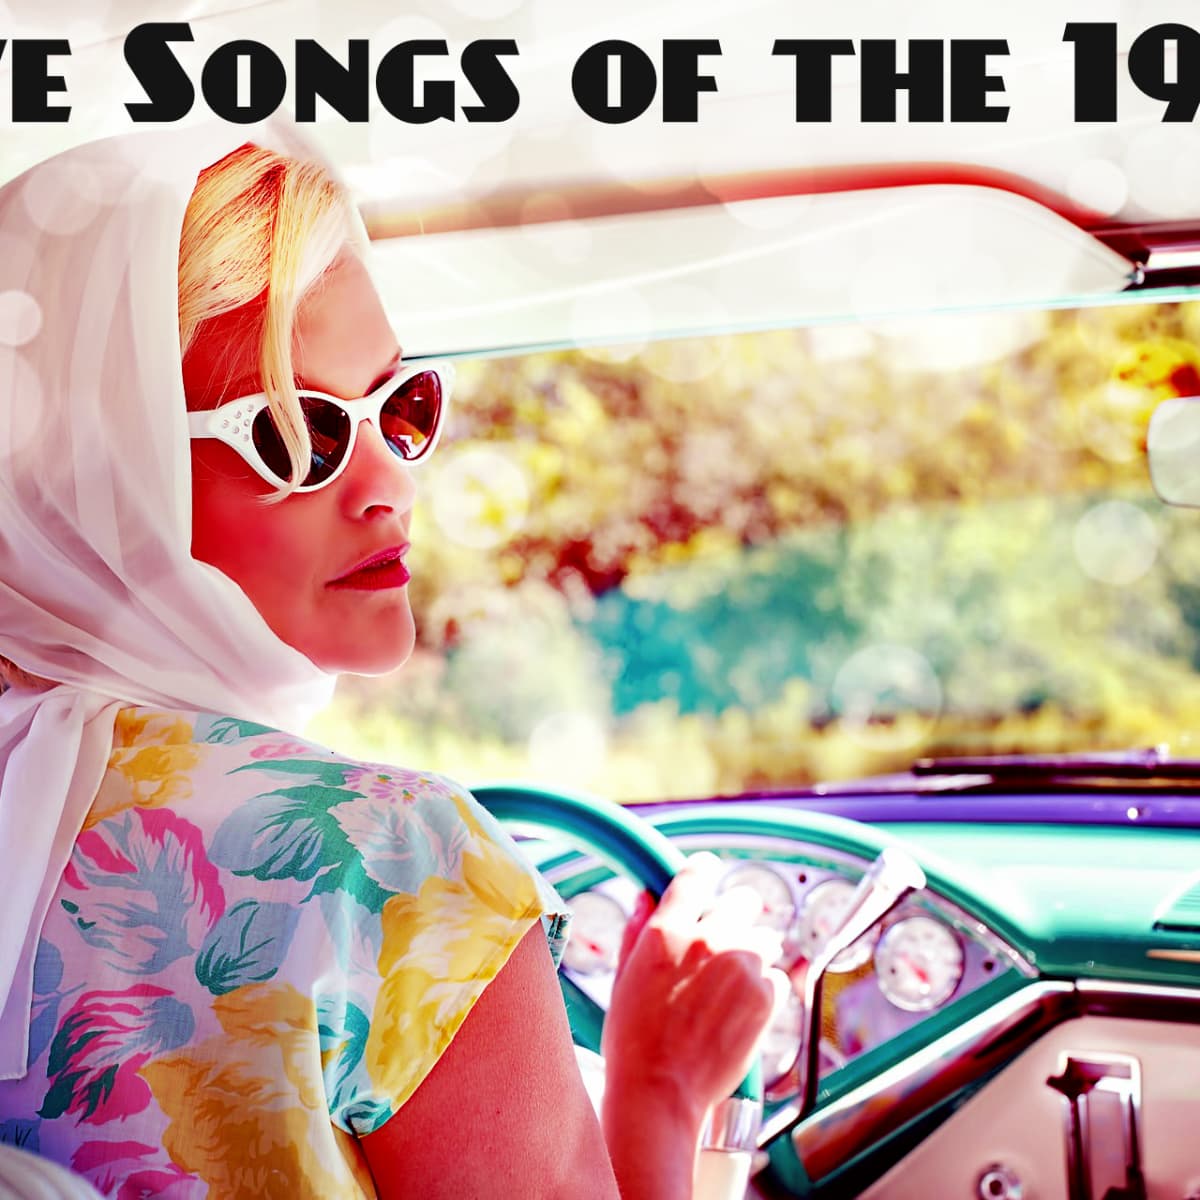 80 Love Songs From The 1950s Spinditty Music